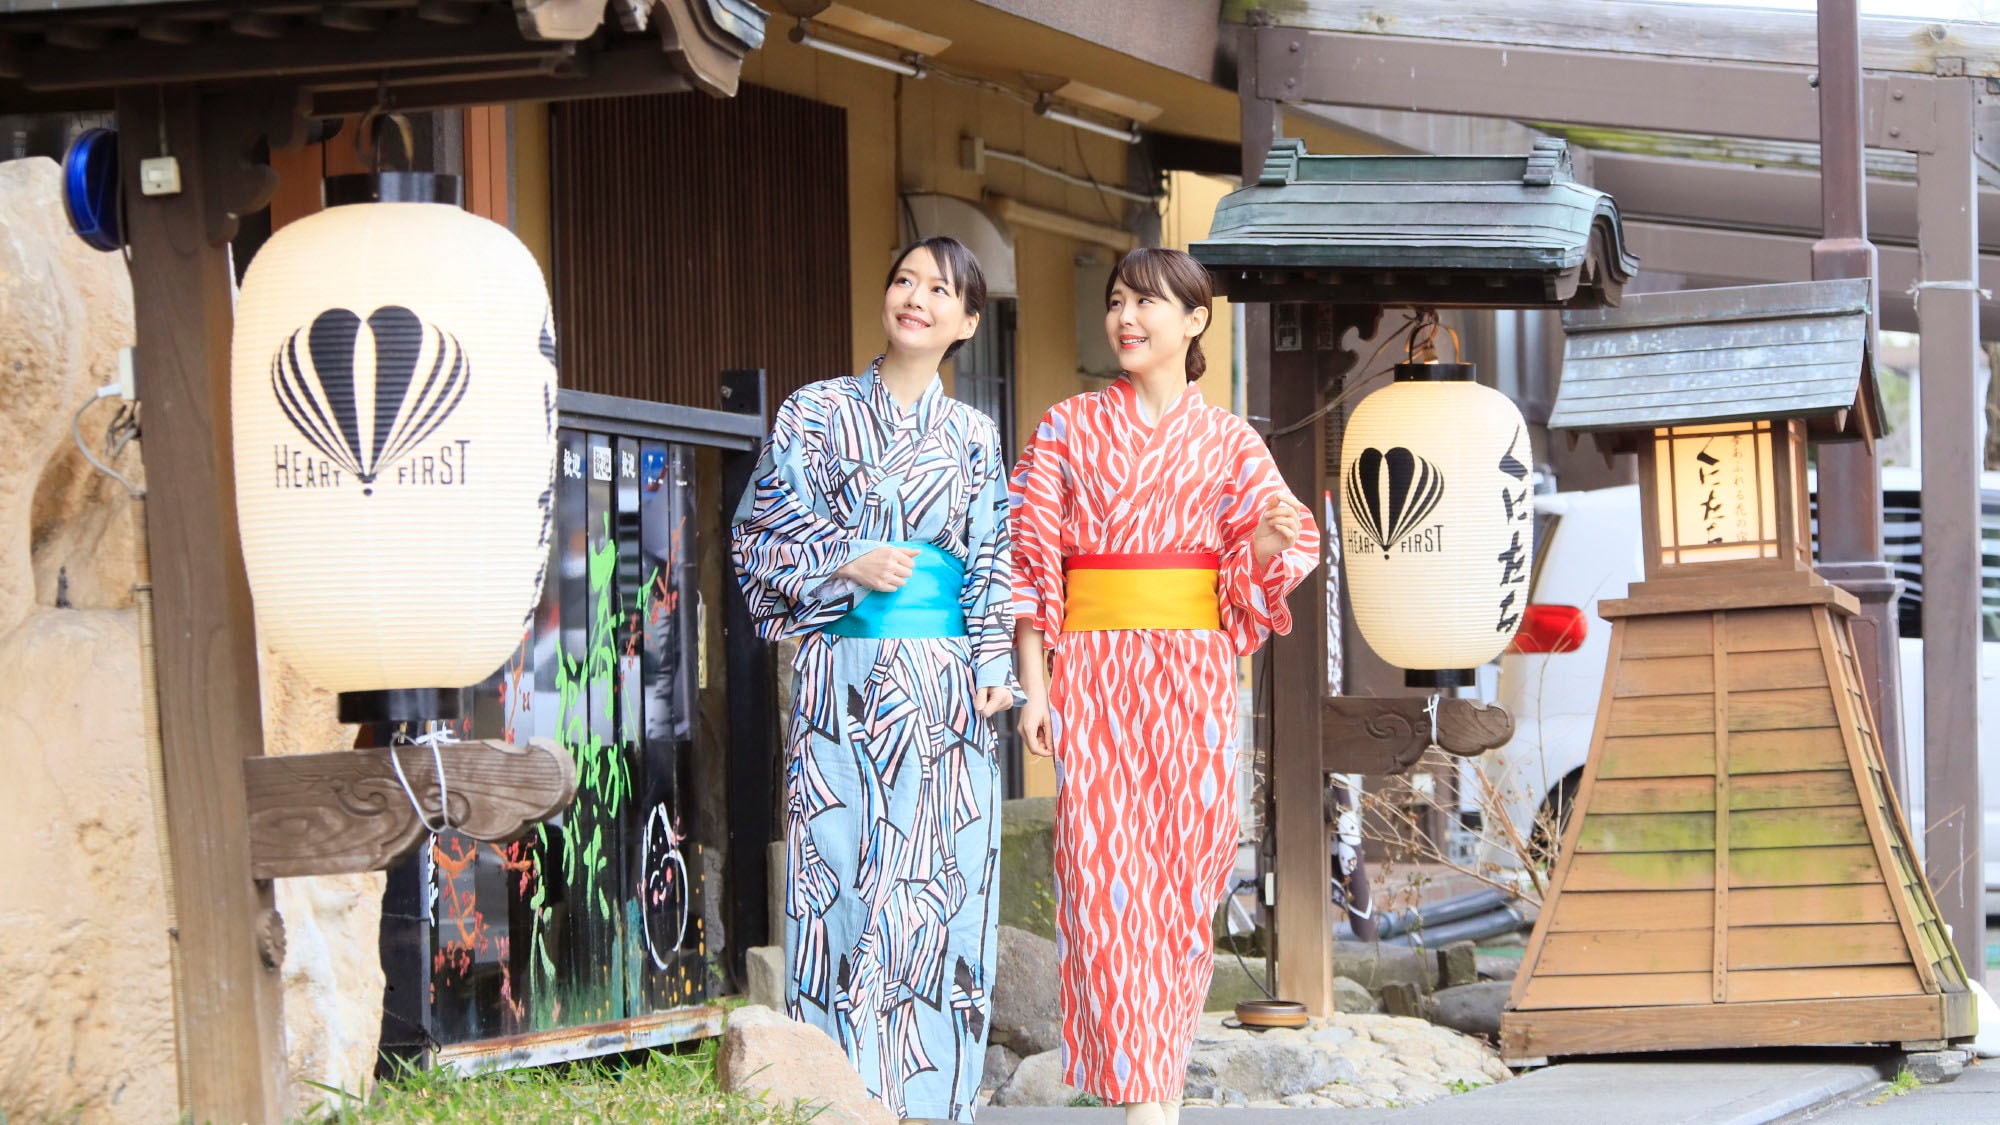 Wearing a colored yukata and taking a leisurely stroll around the area is also recommended.